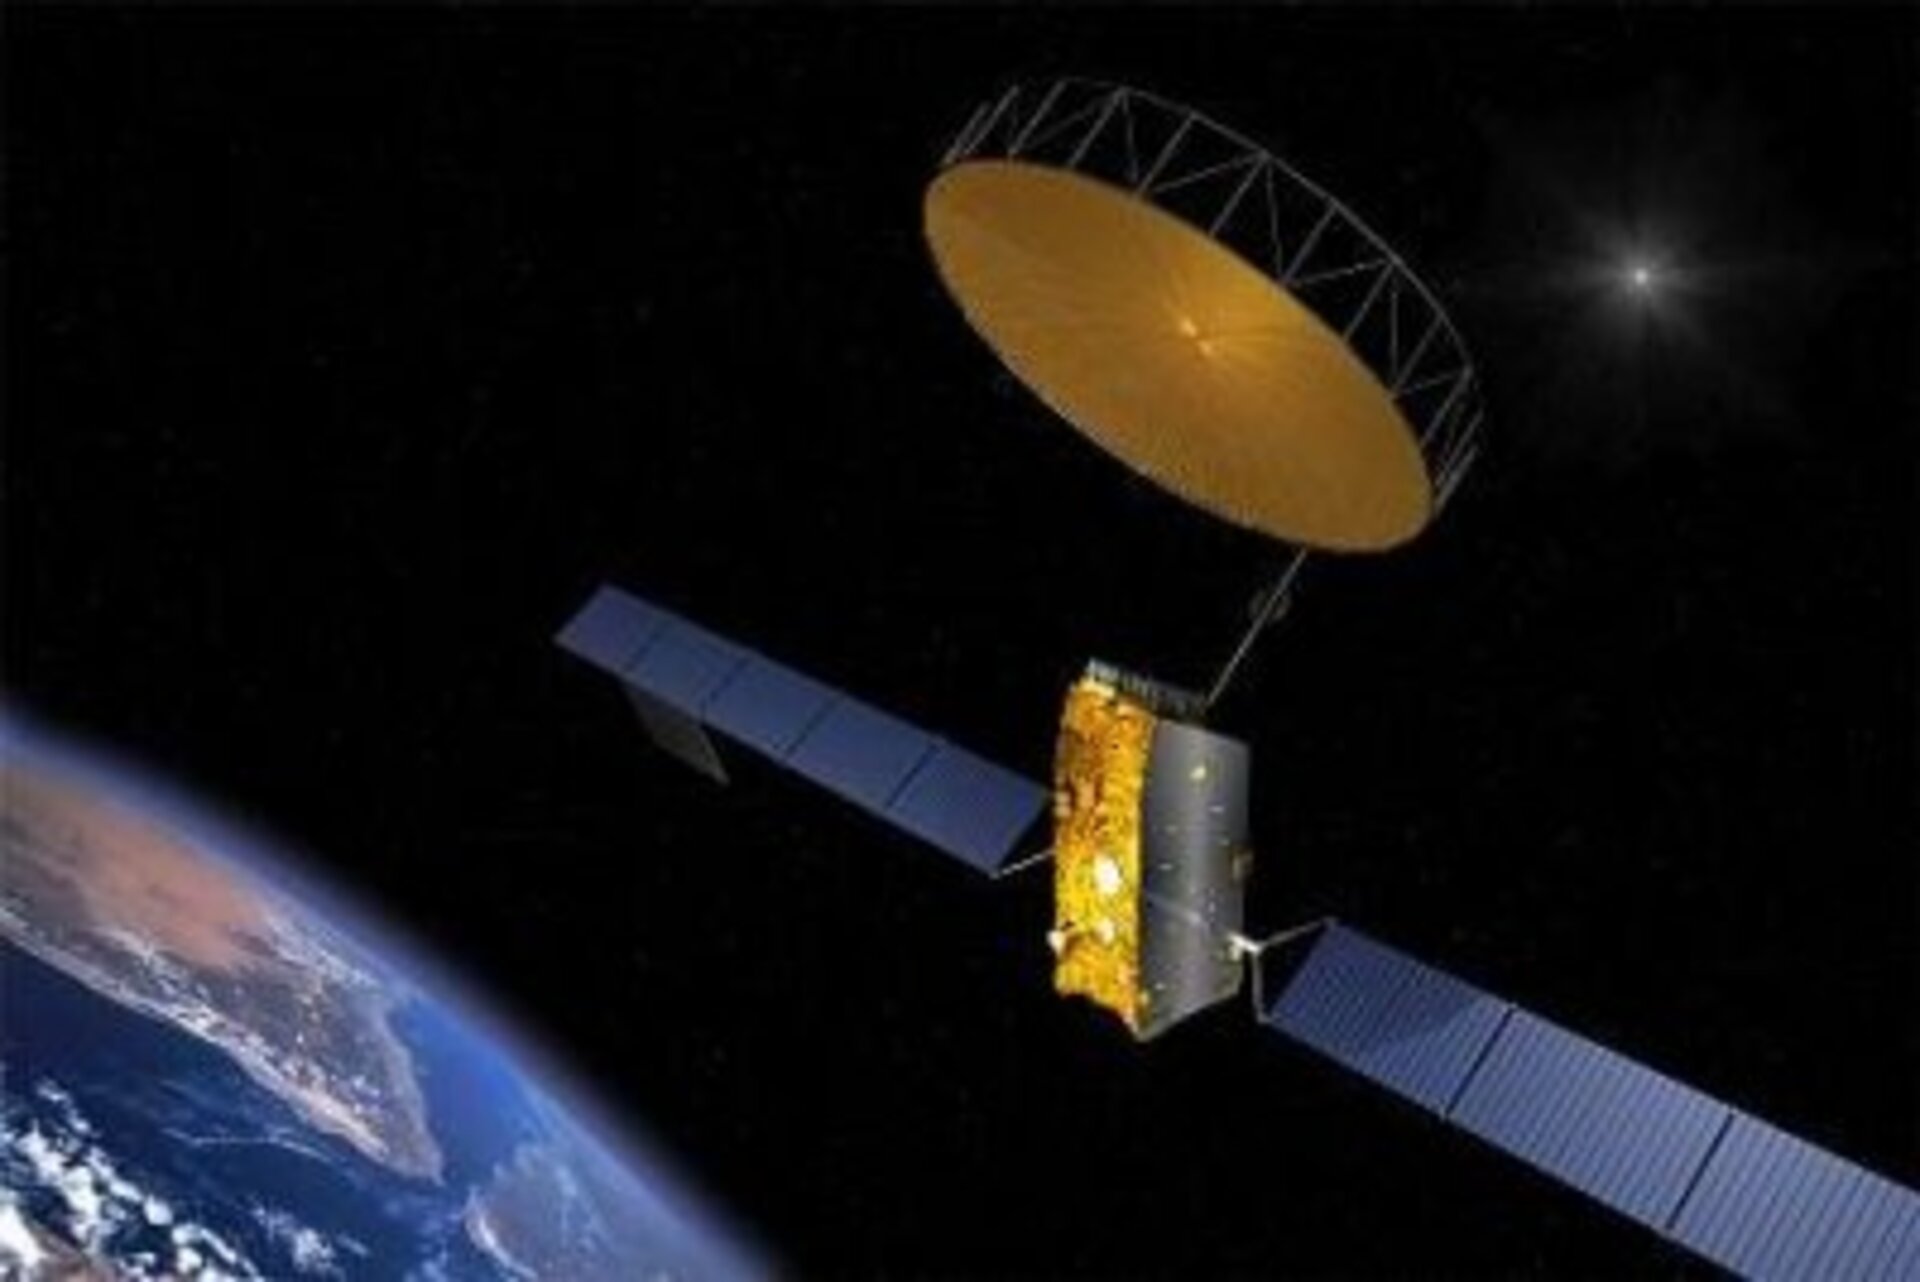 Satellites play a decisive role in efficient communications systems